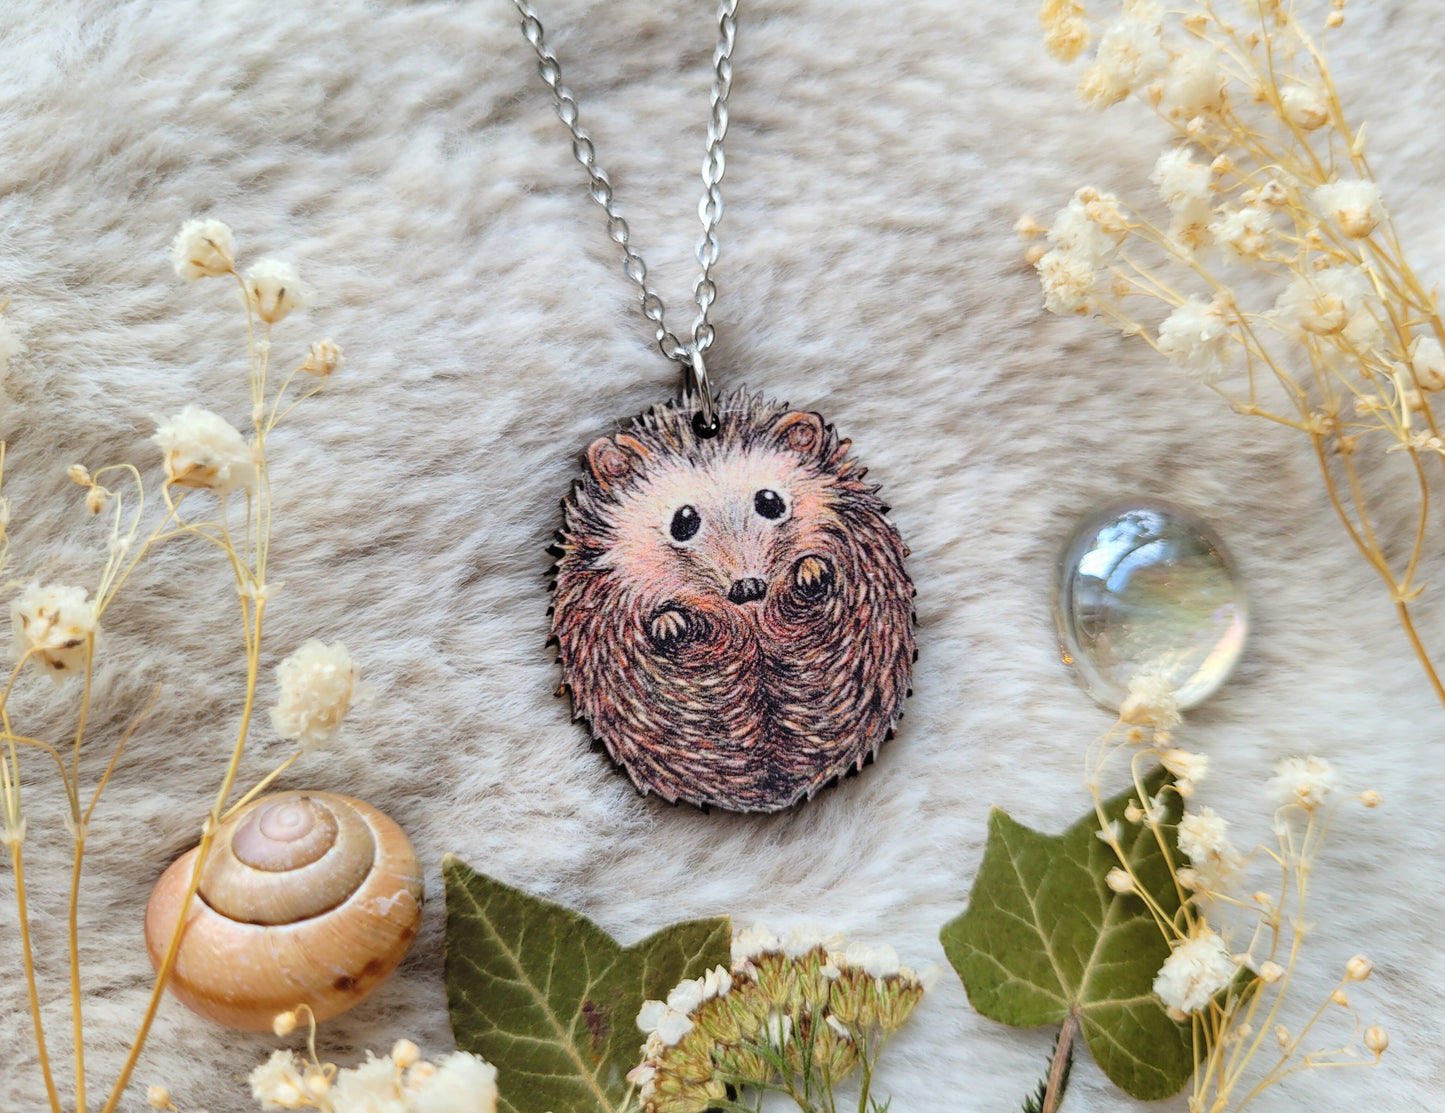 Hedgehog Illustrated necklace, responsibly sourced cherry wood, chain options available, by Grace Moth